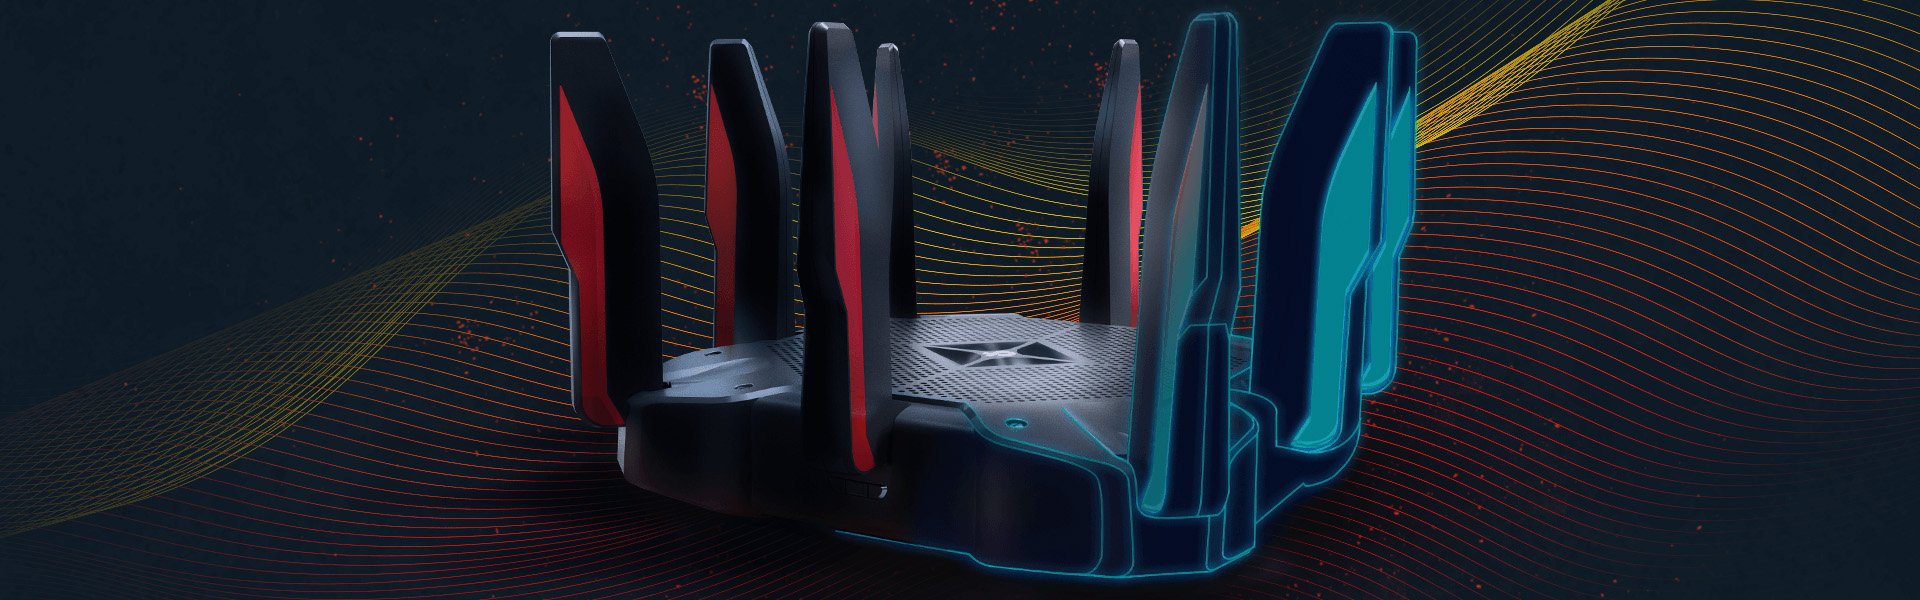 TP-Link Archer C5400x Gaming Router Launches Today 24